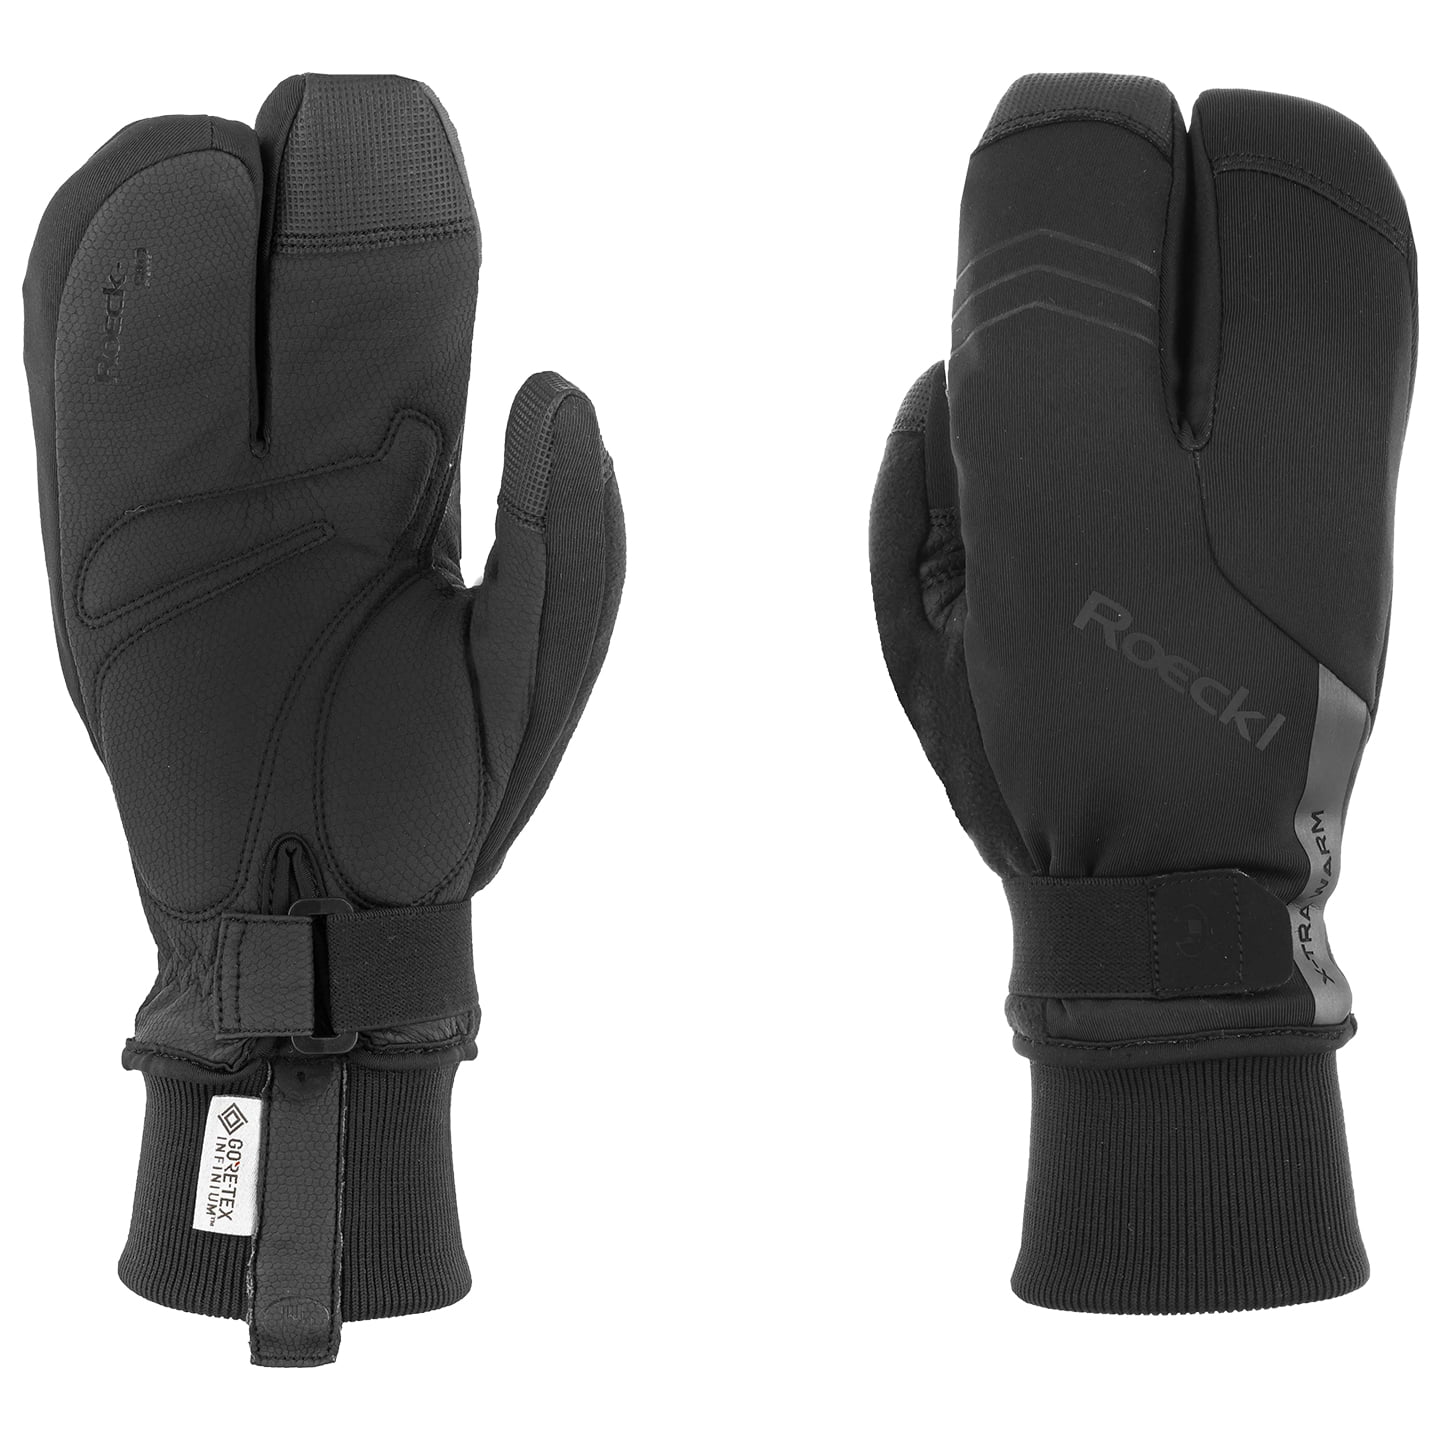 ROECKL Villach 2 Lobster Winter Gloves Winter Cycling Gloves, for men, size 8,5, MTB gloves, Cycling apparel